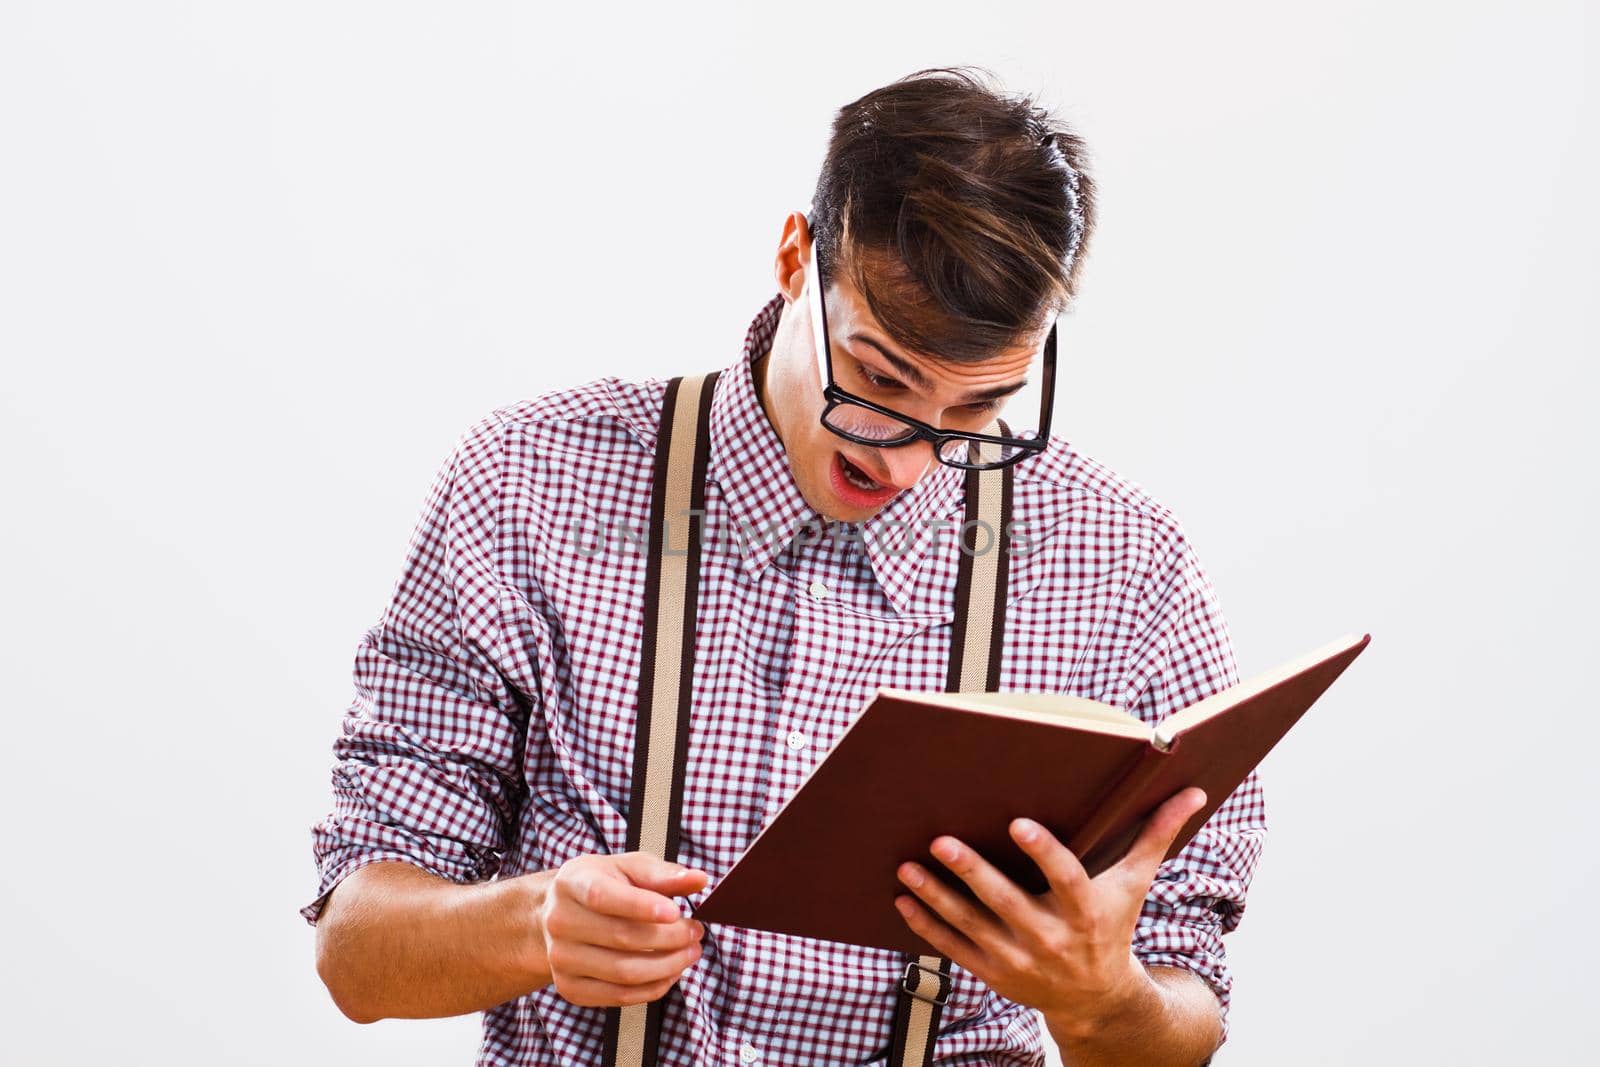 Surprised nerdy man reading book by Bazdar